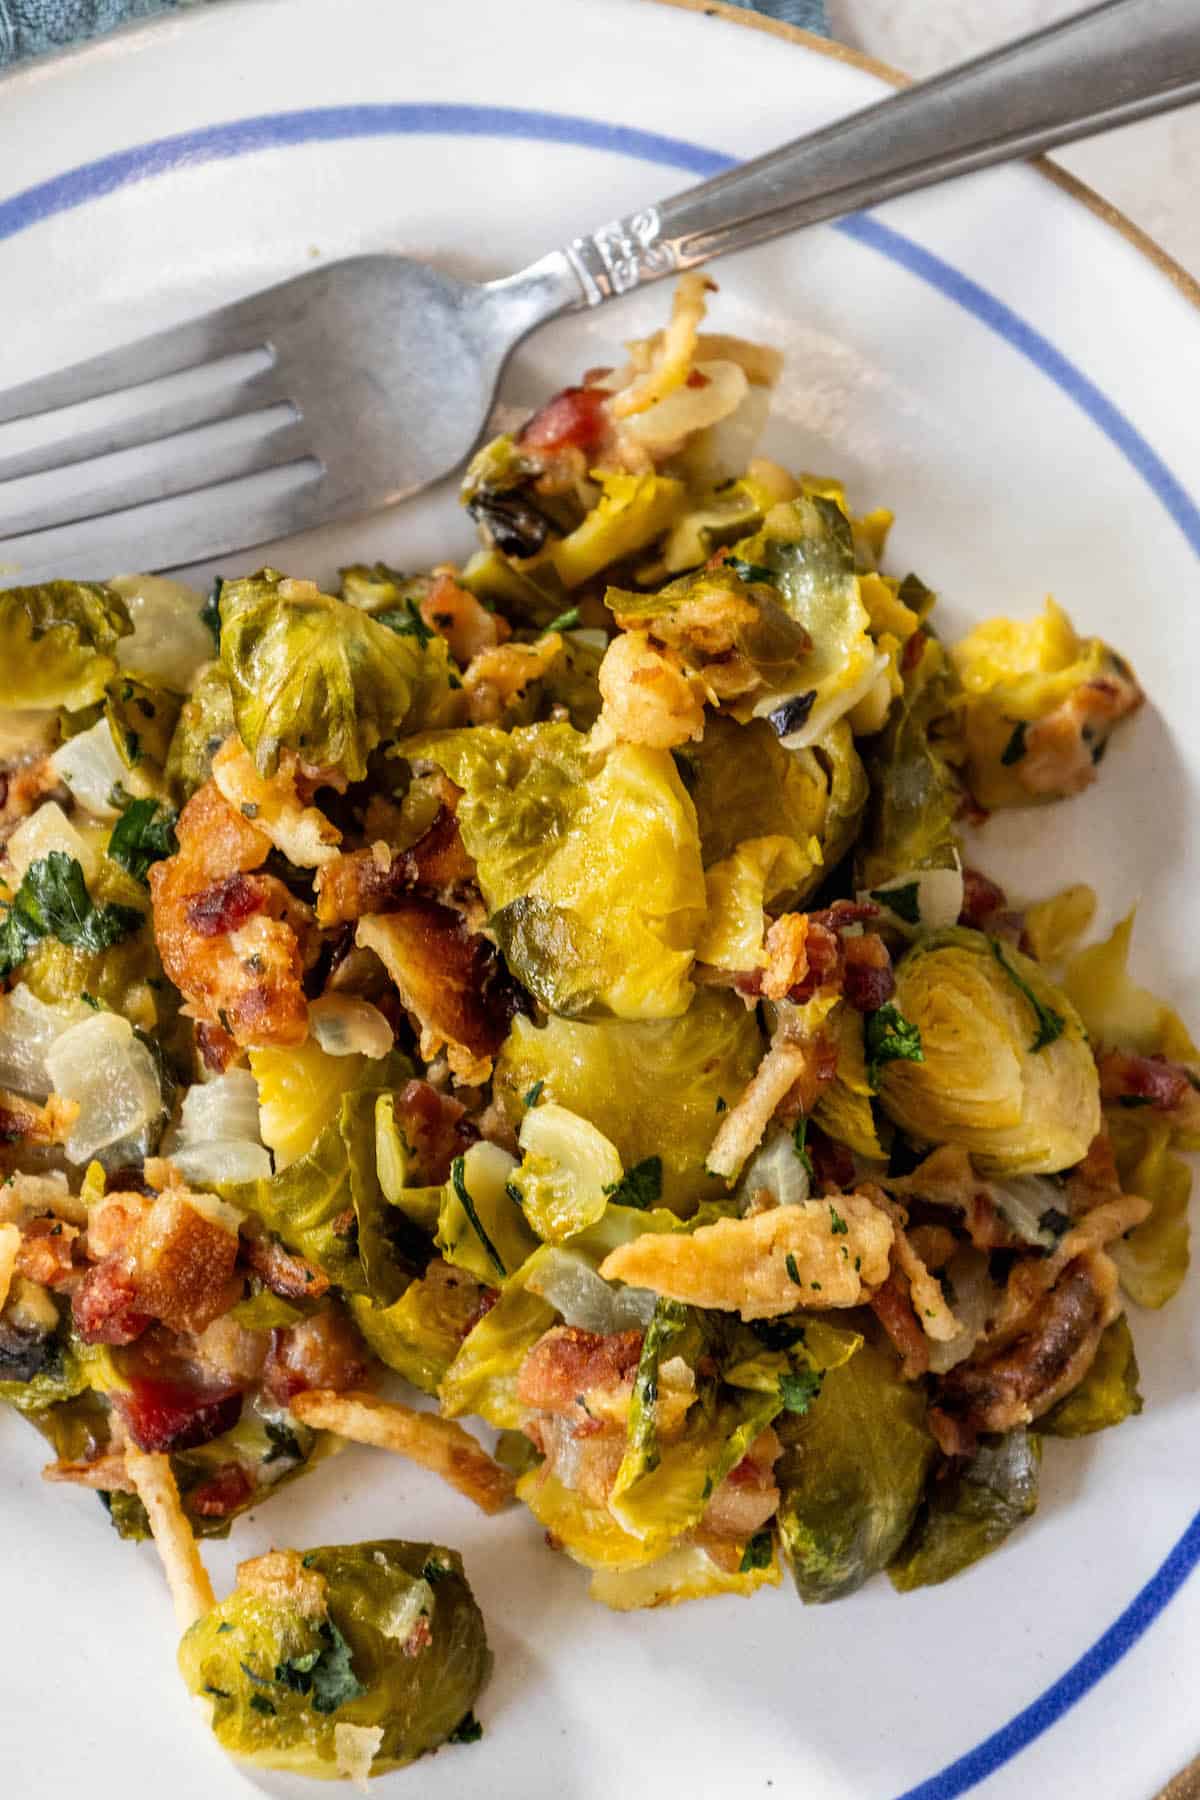 Brussels sprouts and bacon on a plate with a fork, creating a creamy and savory delight.